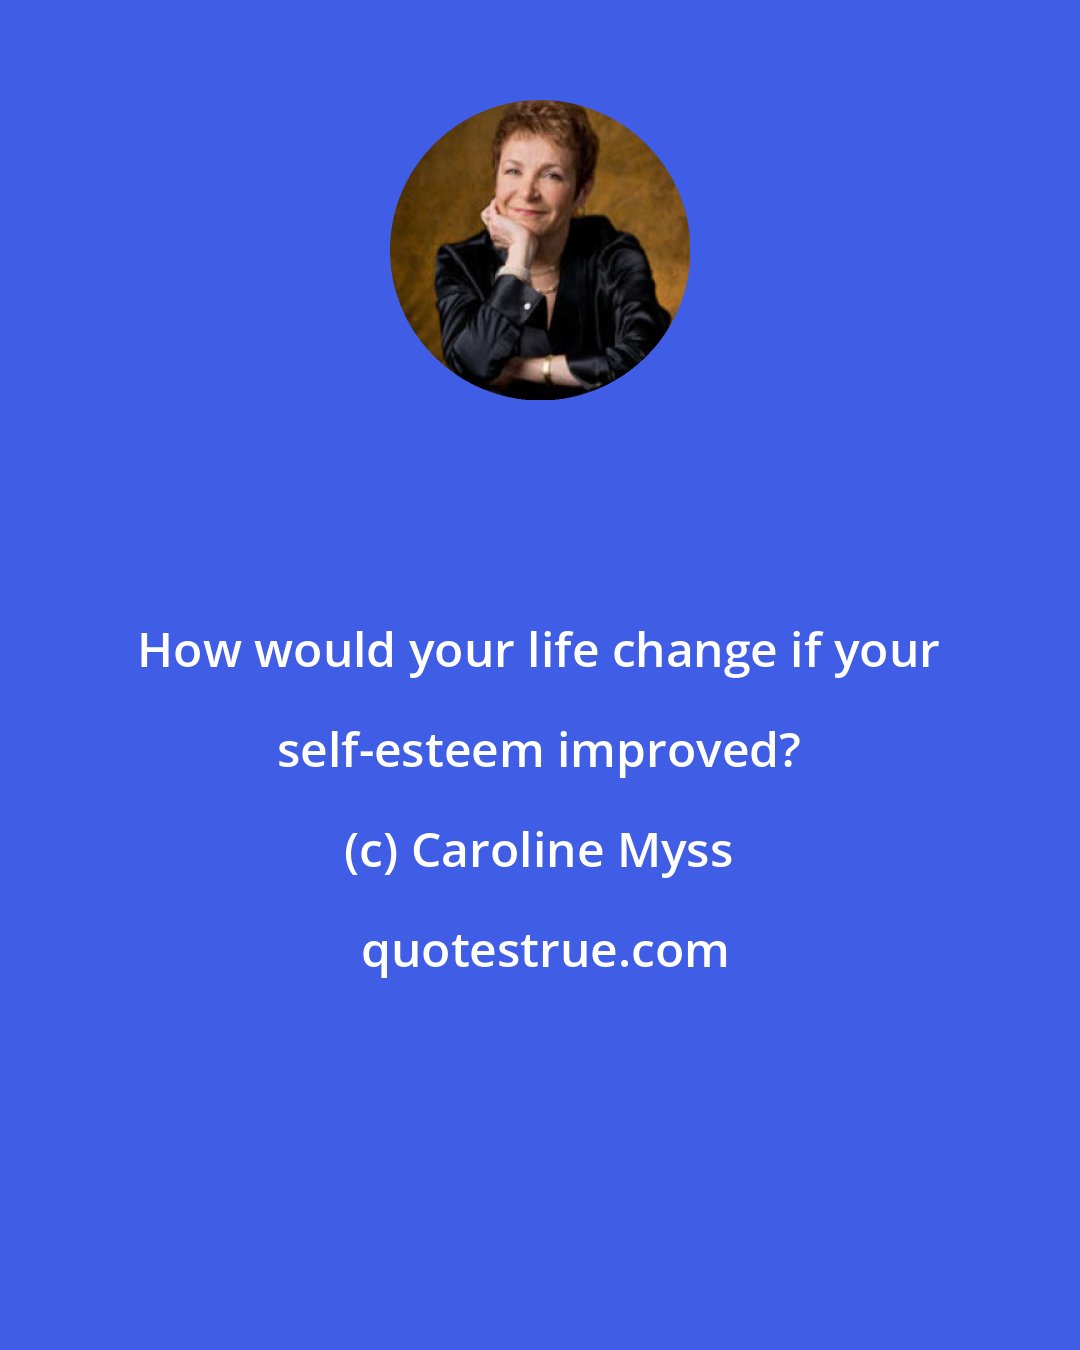 Caroline Myss: How would your life change if your self-esteem improved?